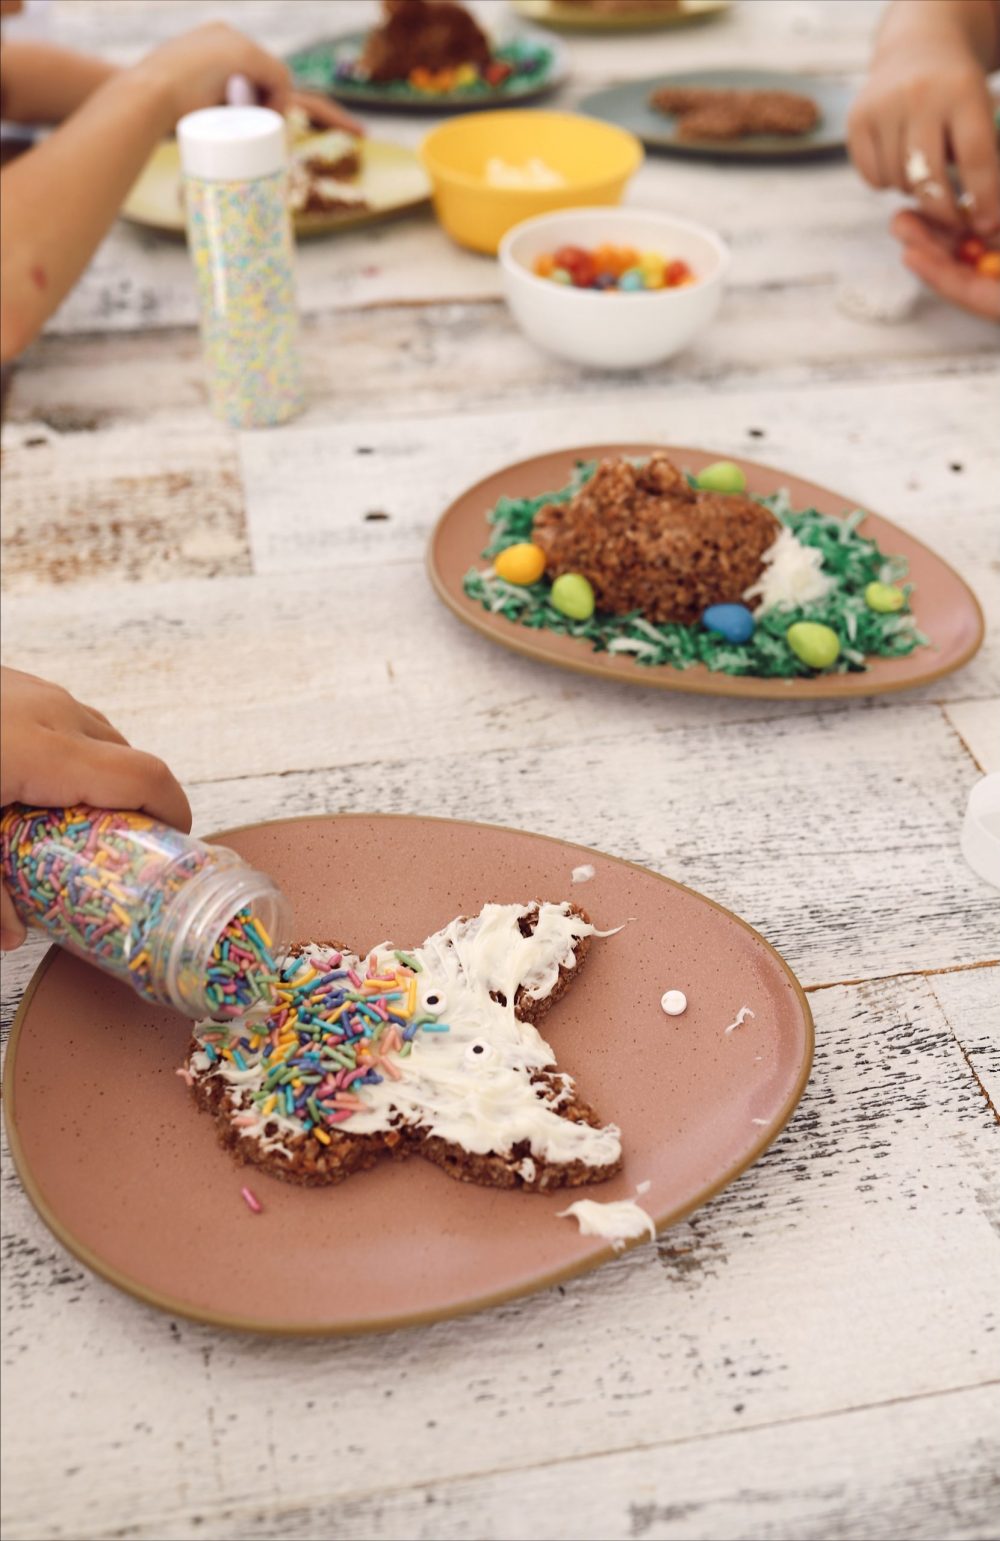 Simple Chocolate Easter Bunny Rice Krispies treats from top lifestyle blogger Tabitha Blue of Fresh Mommy Blog |Chocolate Rice Krispies Treats by popular Florida lifestyle blog, Fresh Mommy Blog: image of Easter Bunny shaped chocolate Rice Krispies treats,  a bowl of white frosting, pastel sprinkles, and white ceramic bowls filled with egg shaped jelly beans.  